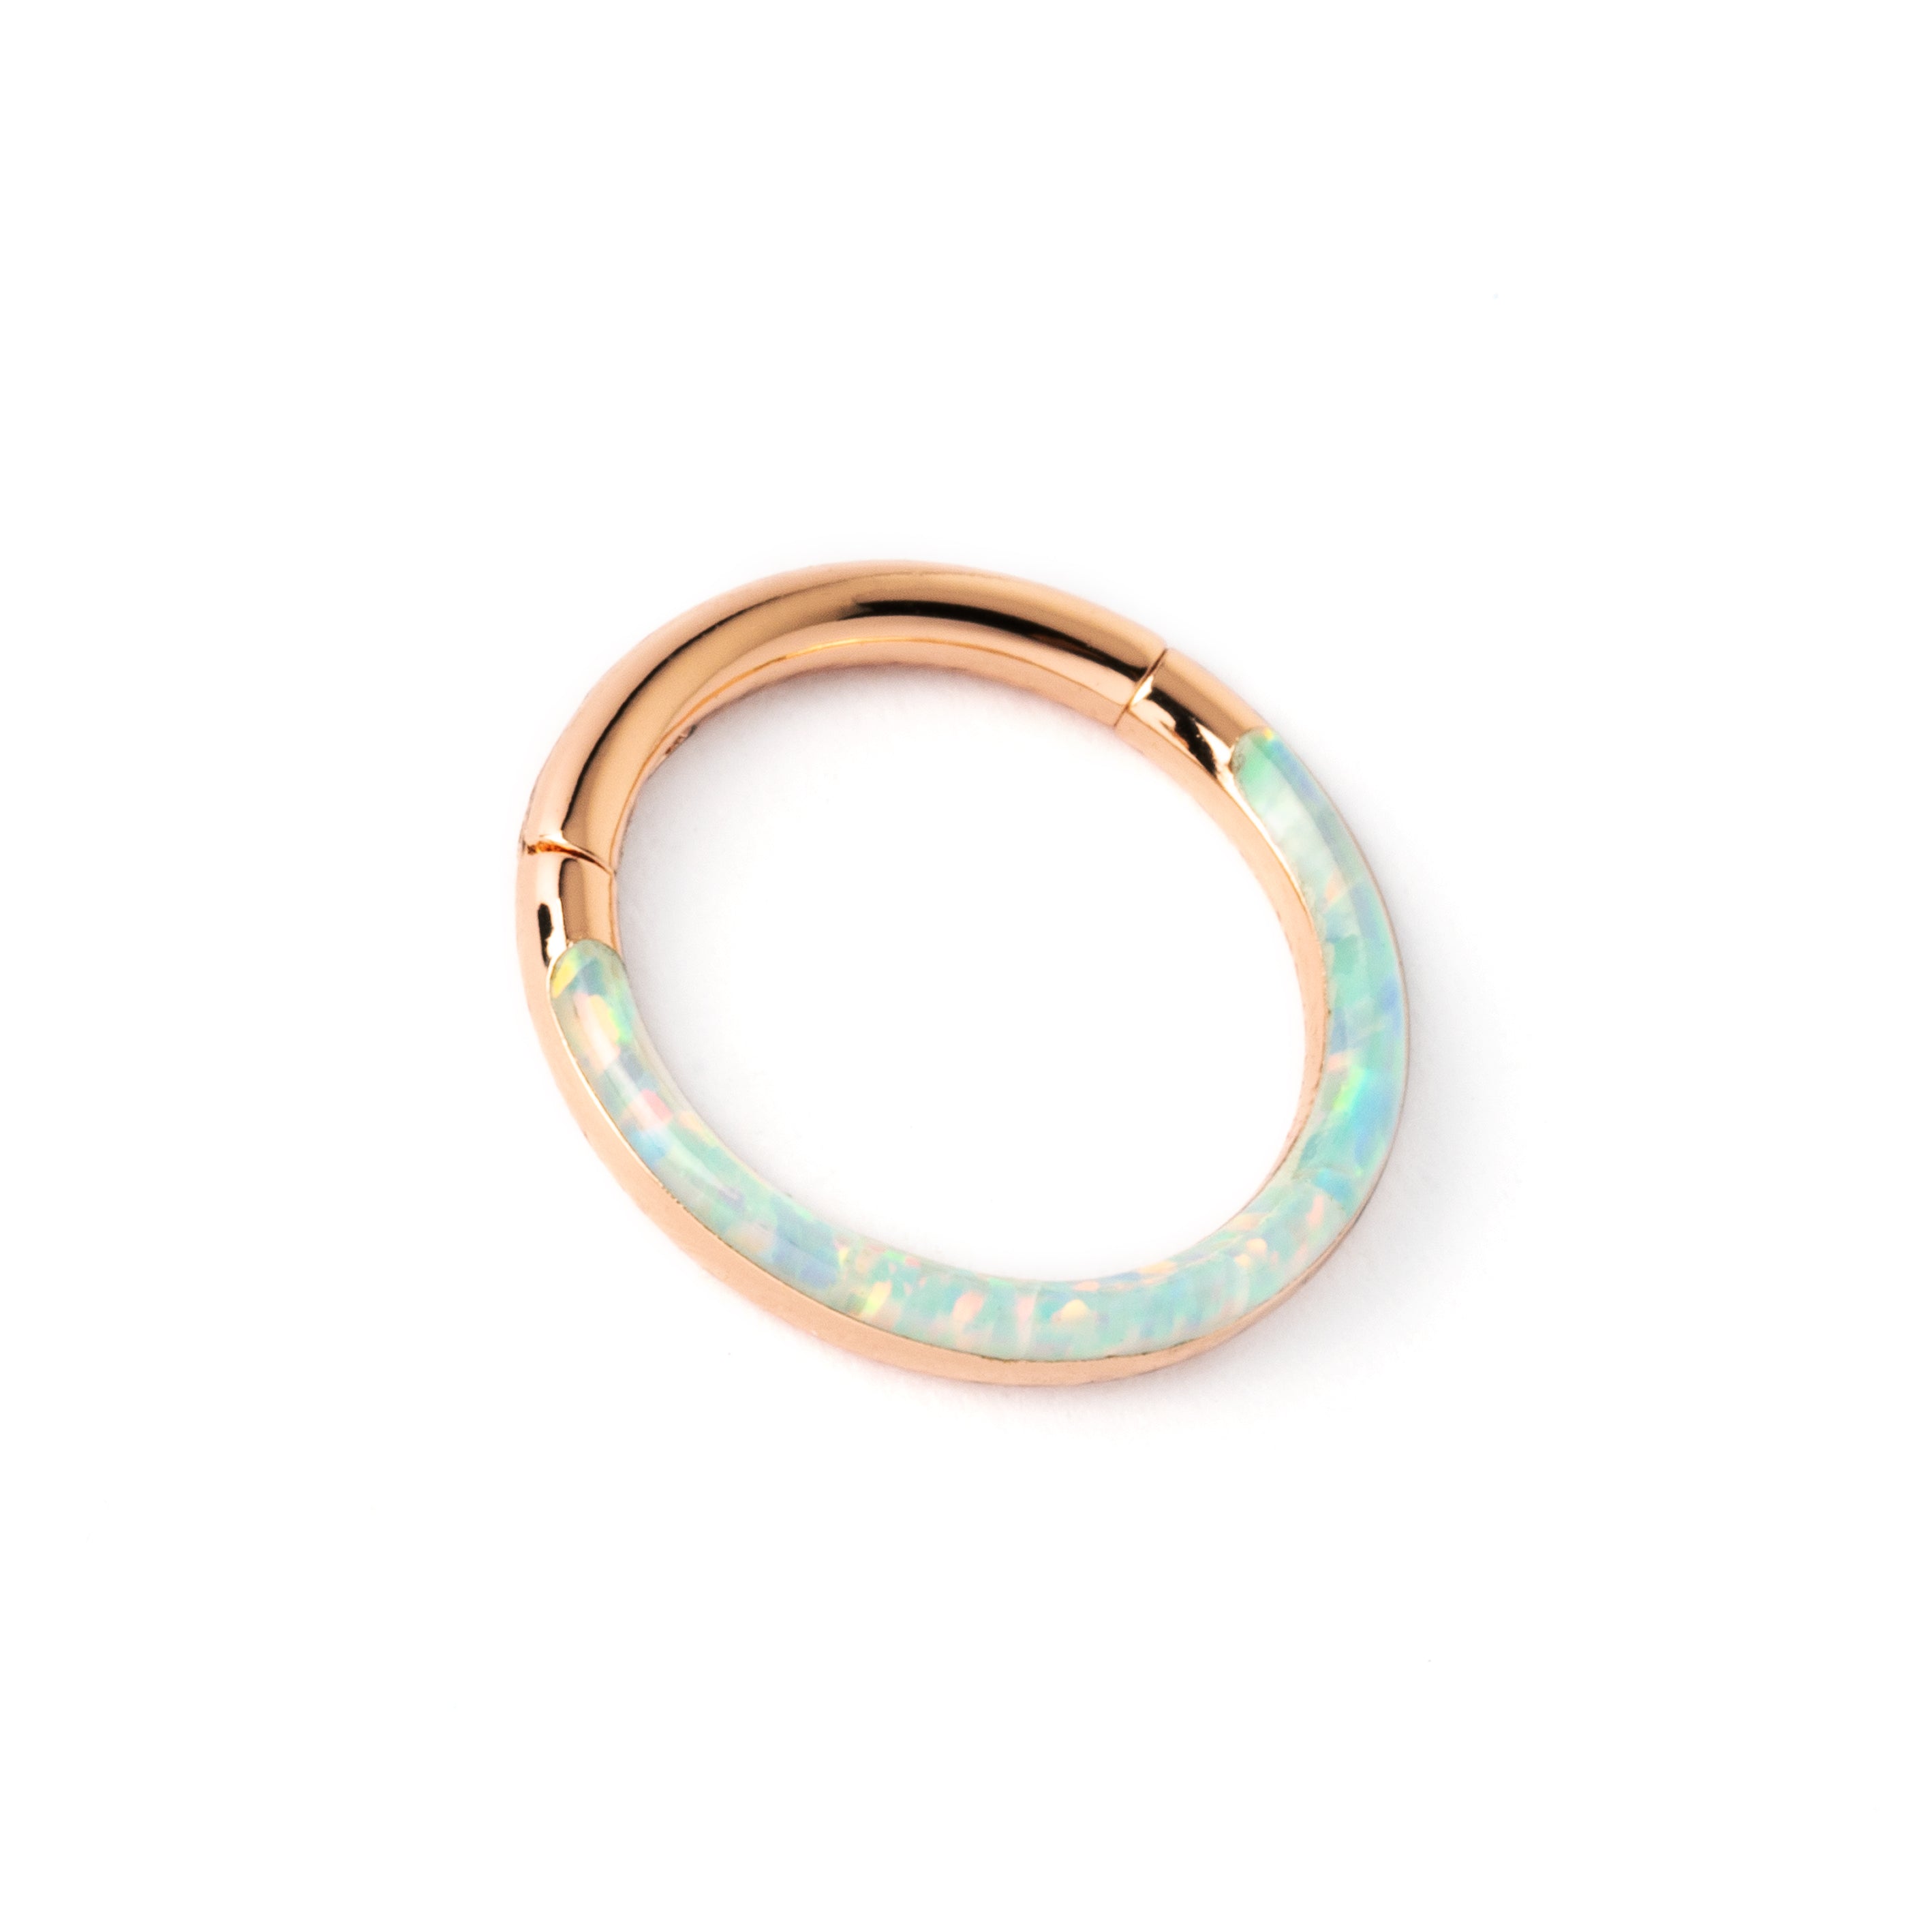 Rose Gold surgical steel septum clicker ring with white opal inlay right side view